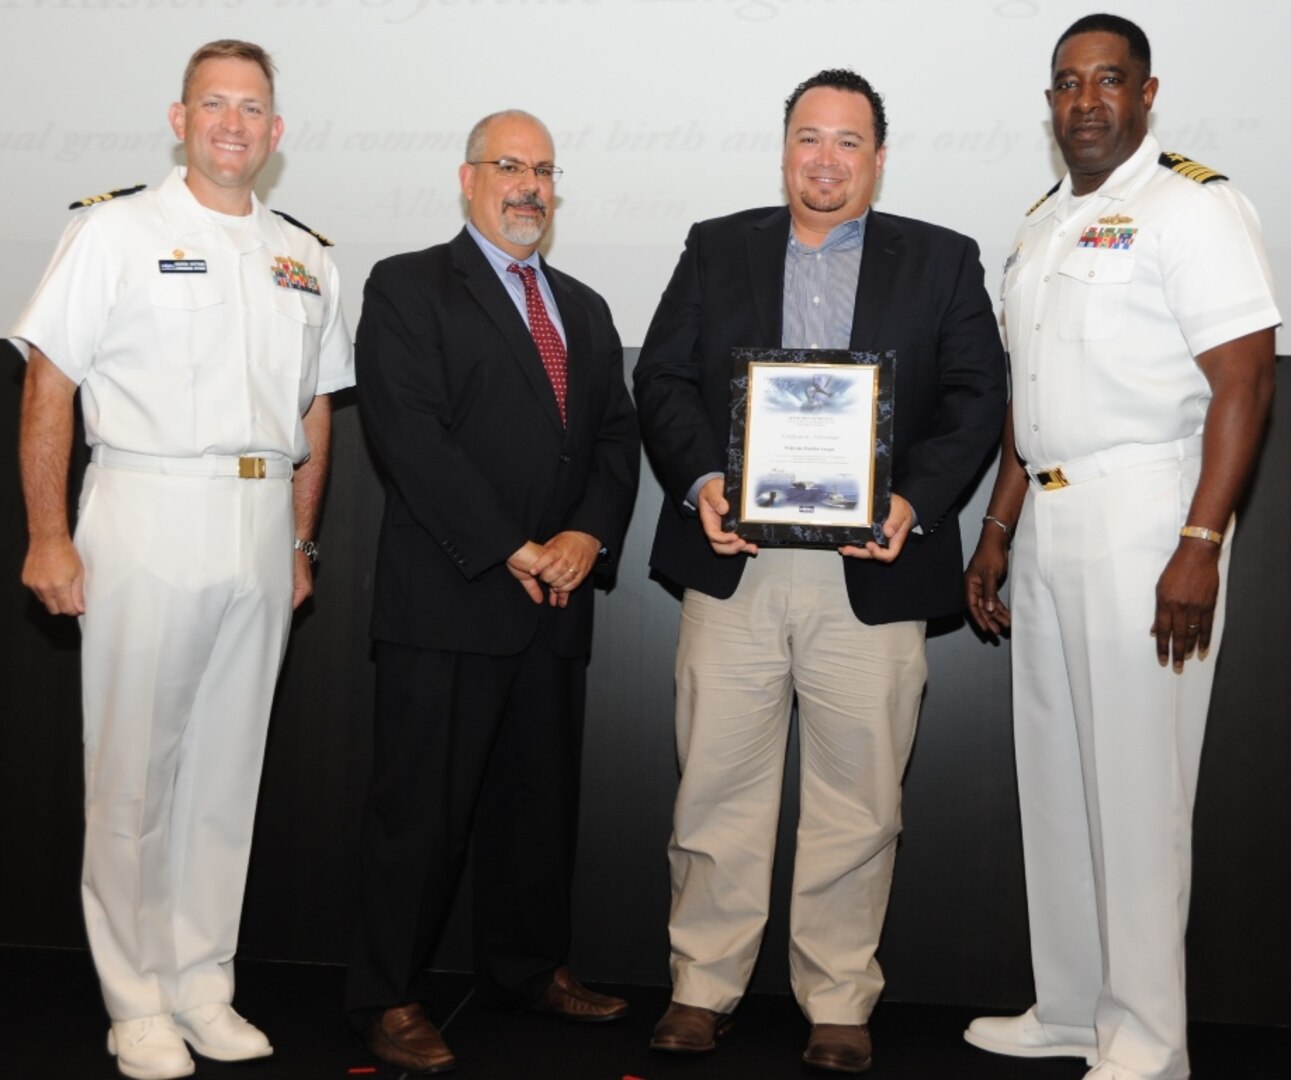 IMAGE: DAHLGREN, Va. - Wilfredo Padilla-Vargas receives his certificate of achievement from Naval Surface Warfare Center Dahlgren Division (NSWCDD) Technical Director John Fiore, NSWCDD Commanding Officer Capt. Godfrey 'Gus' Weekes, right, and Combat Direction Systems Activity Dam Neck Commanding Officer Cmdr. Andrew Hoffman at the 2017 NSWCDD academic awards ceremony. Padilla-Vargas was recognized for completing his master's in systems engineering from the Naval Postgraduate School, and commended for his commitment to personal and professional development.